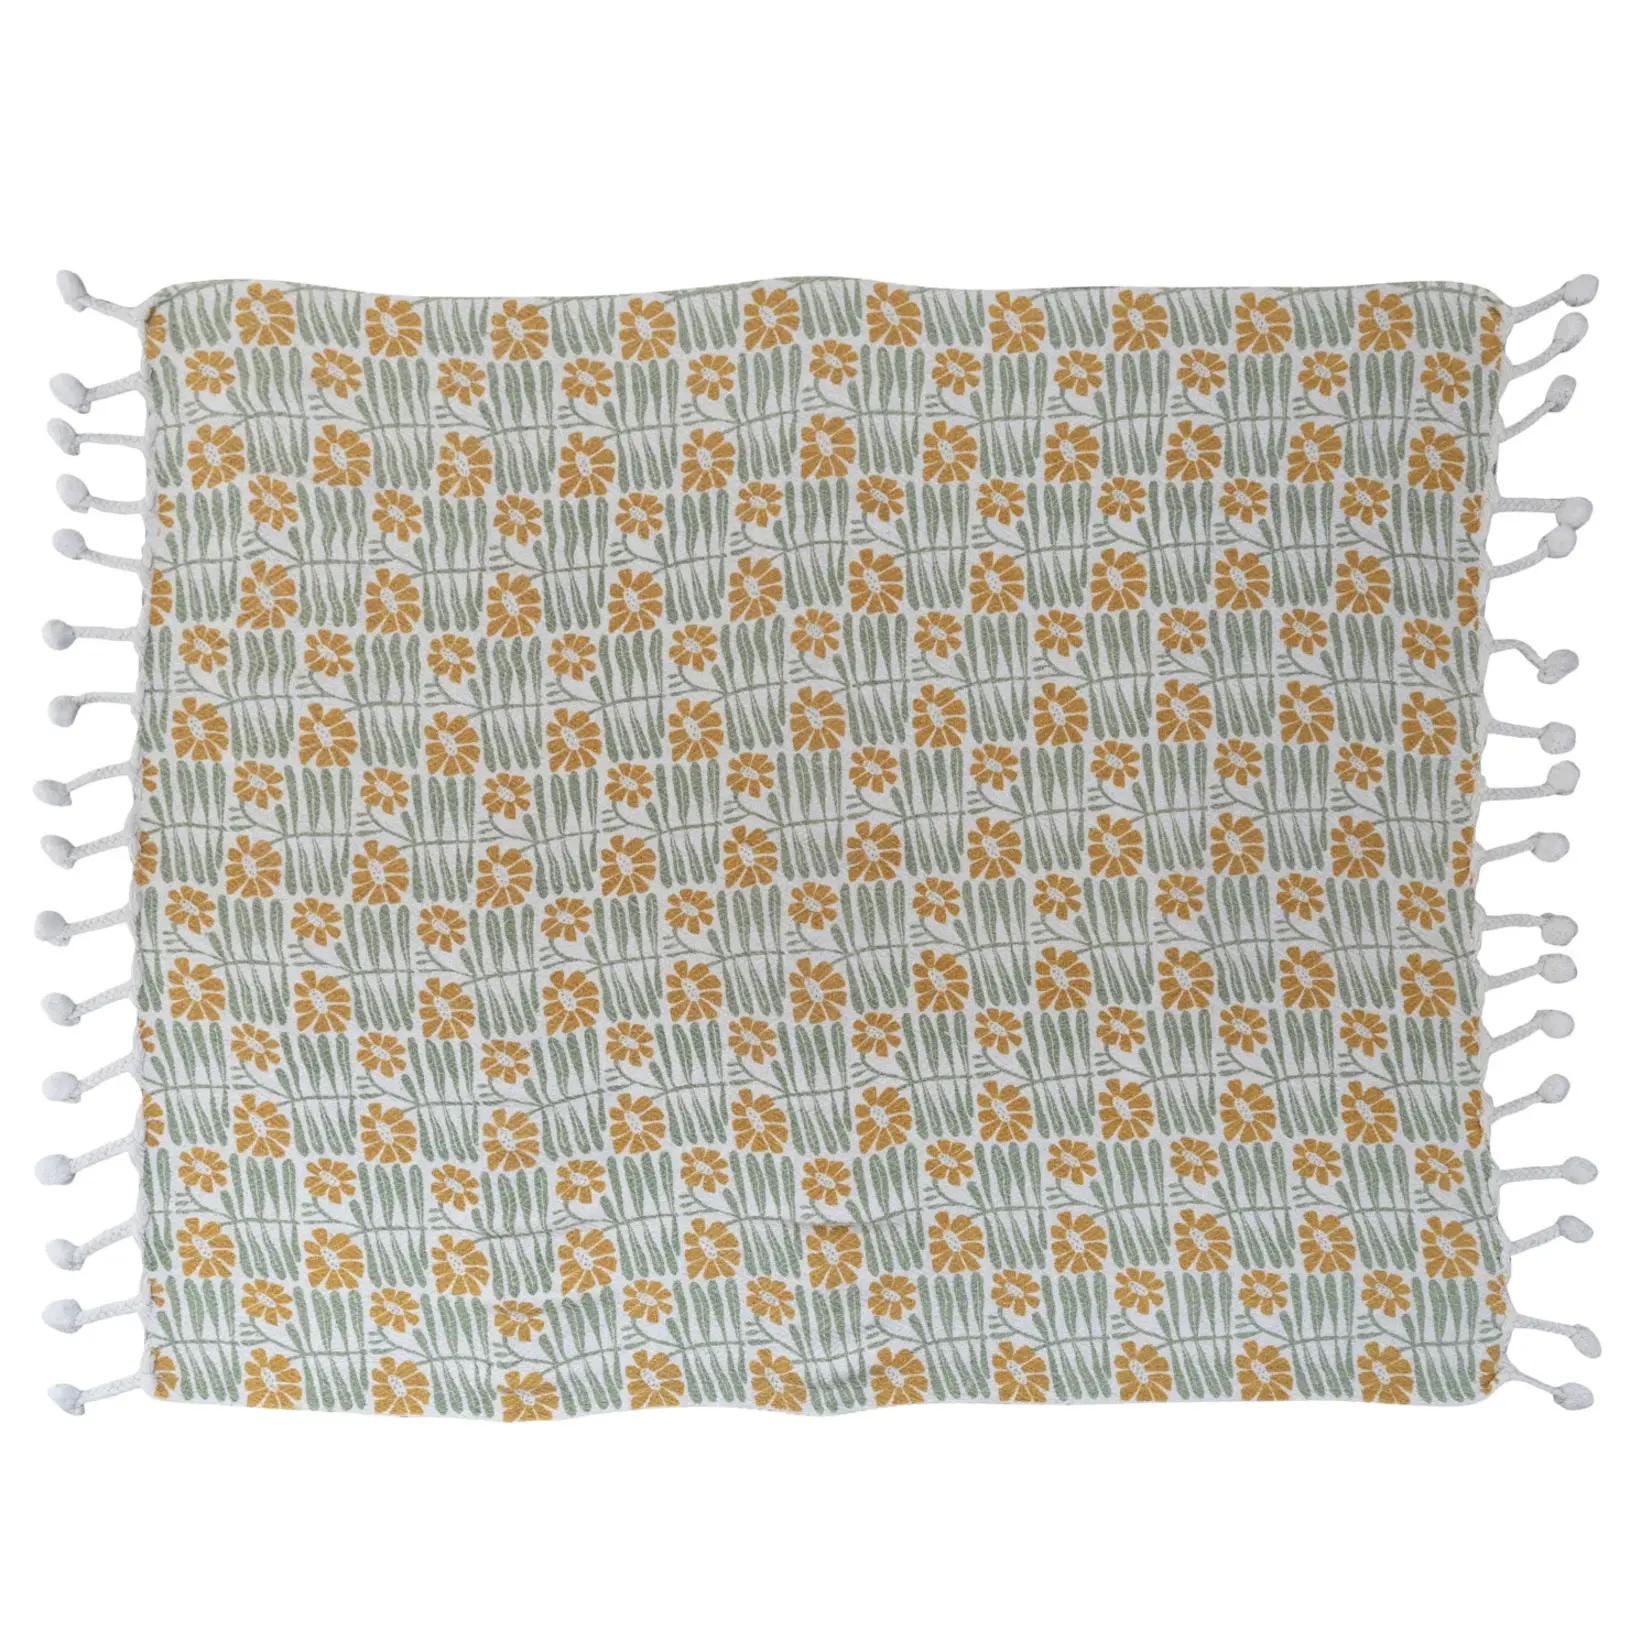 Buttercup Flowers Throw Blanket